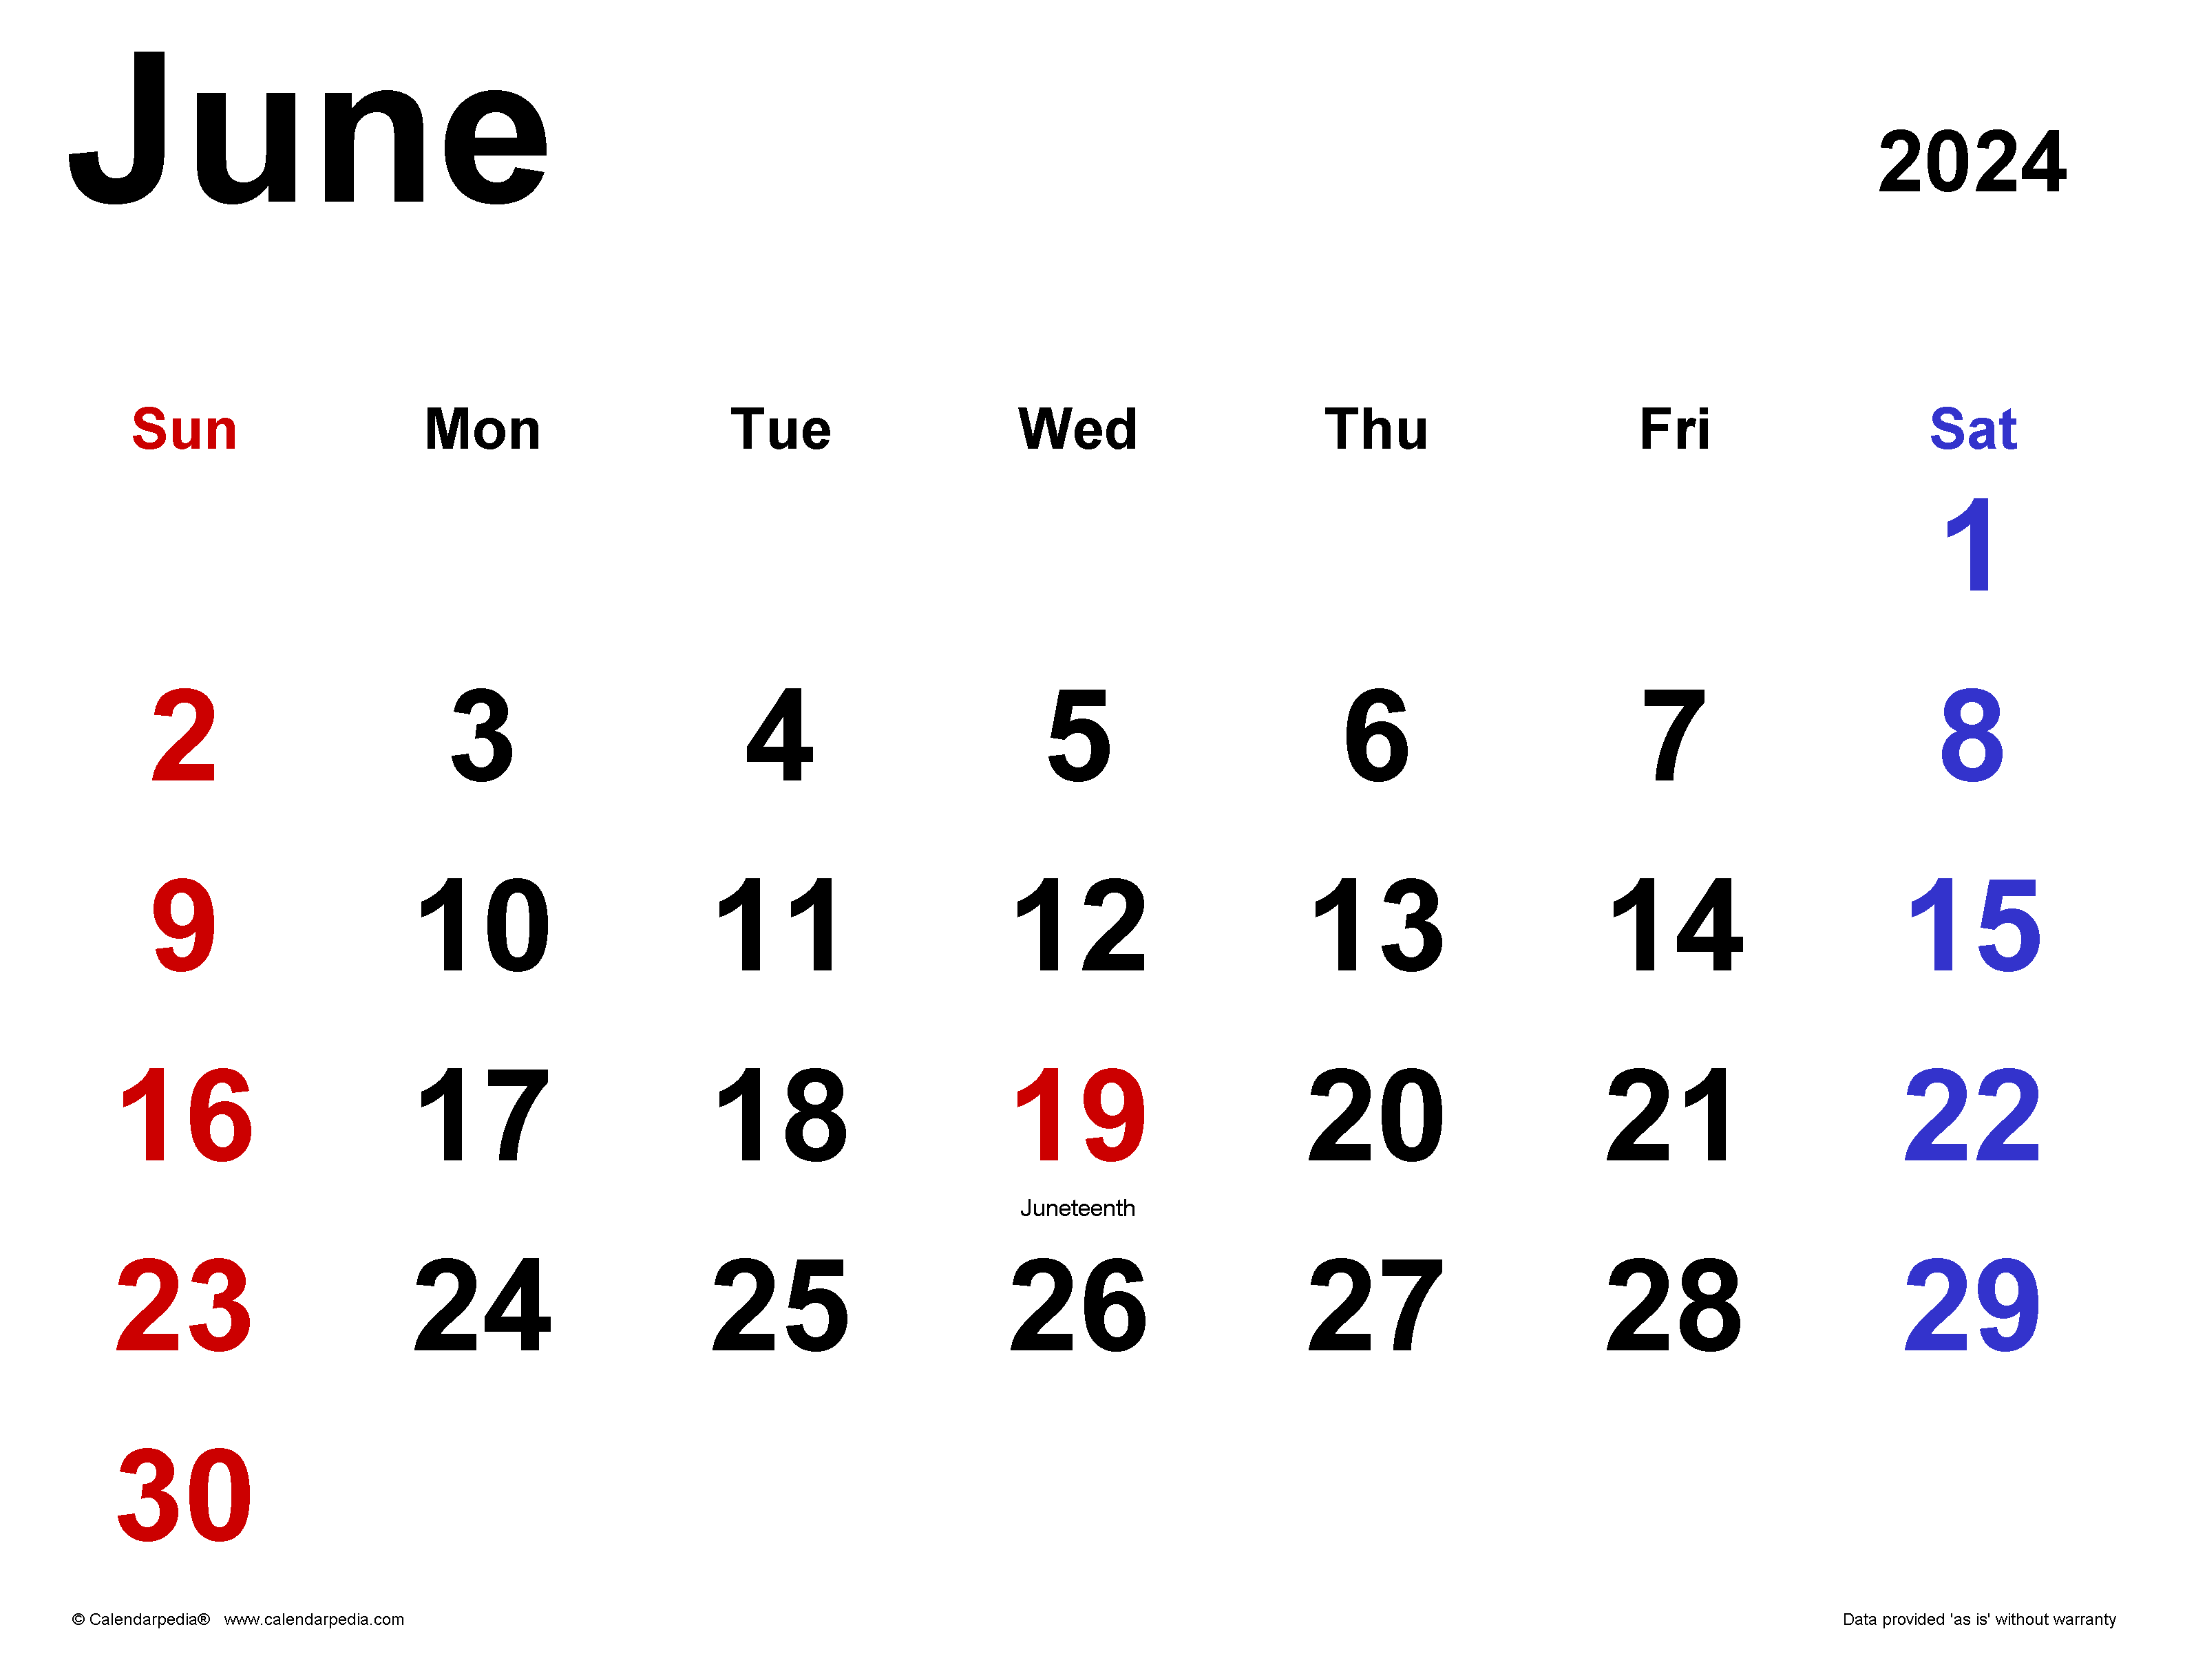 June 2024 Calendar | Templates For Word, Excel And Pdf intended for A Calendar For The Month Of June 2024